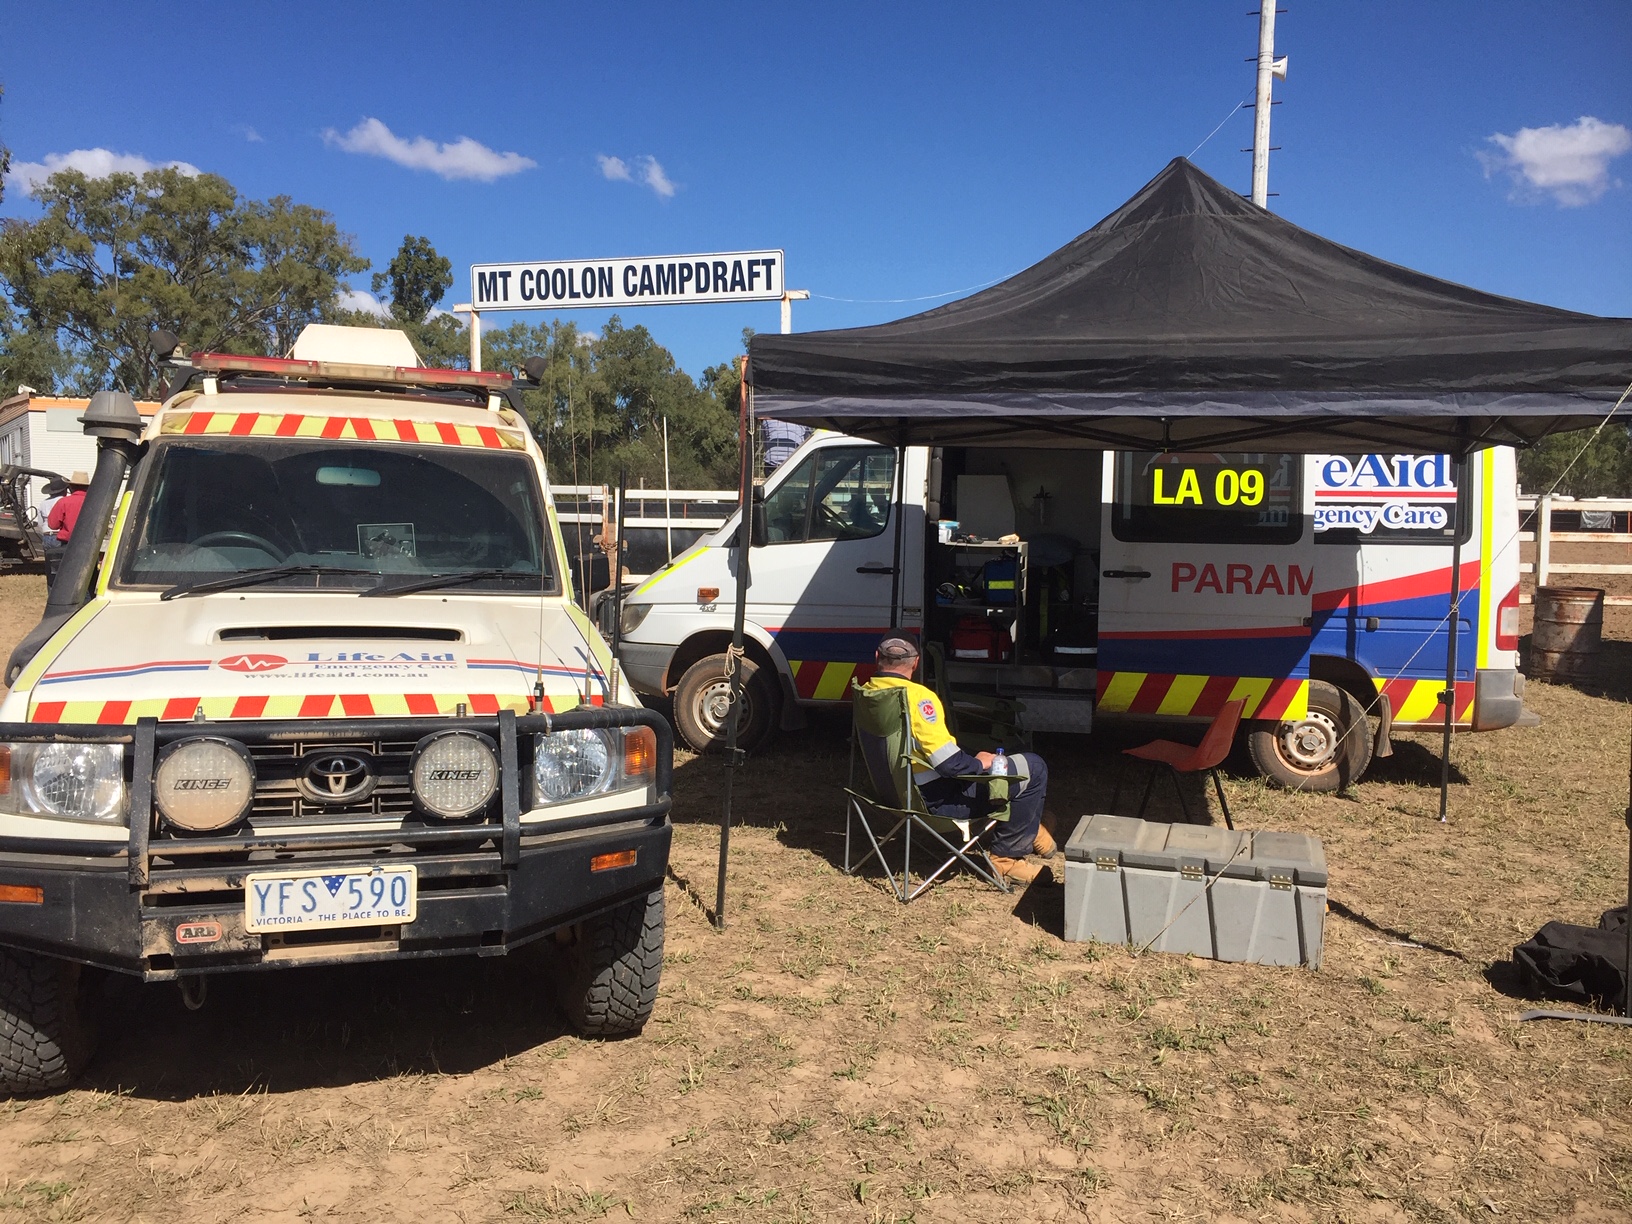 Two 4WD ambulances with the LifeAid logo, and a paramedic sitting in a camp chair in the shade beside them.